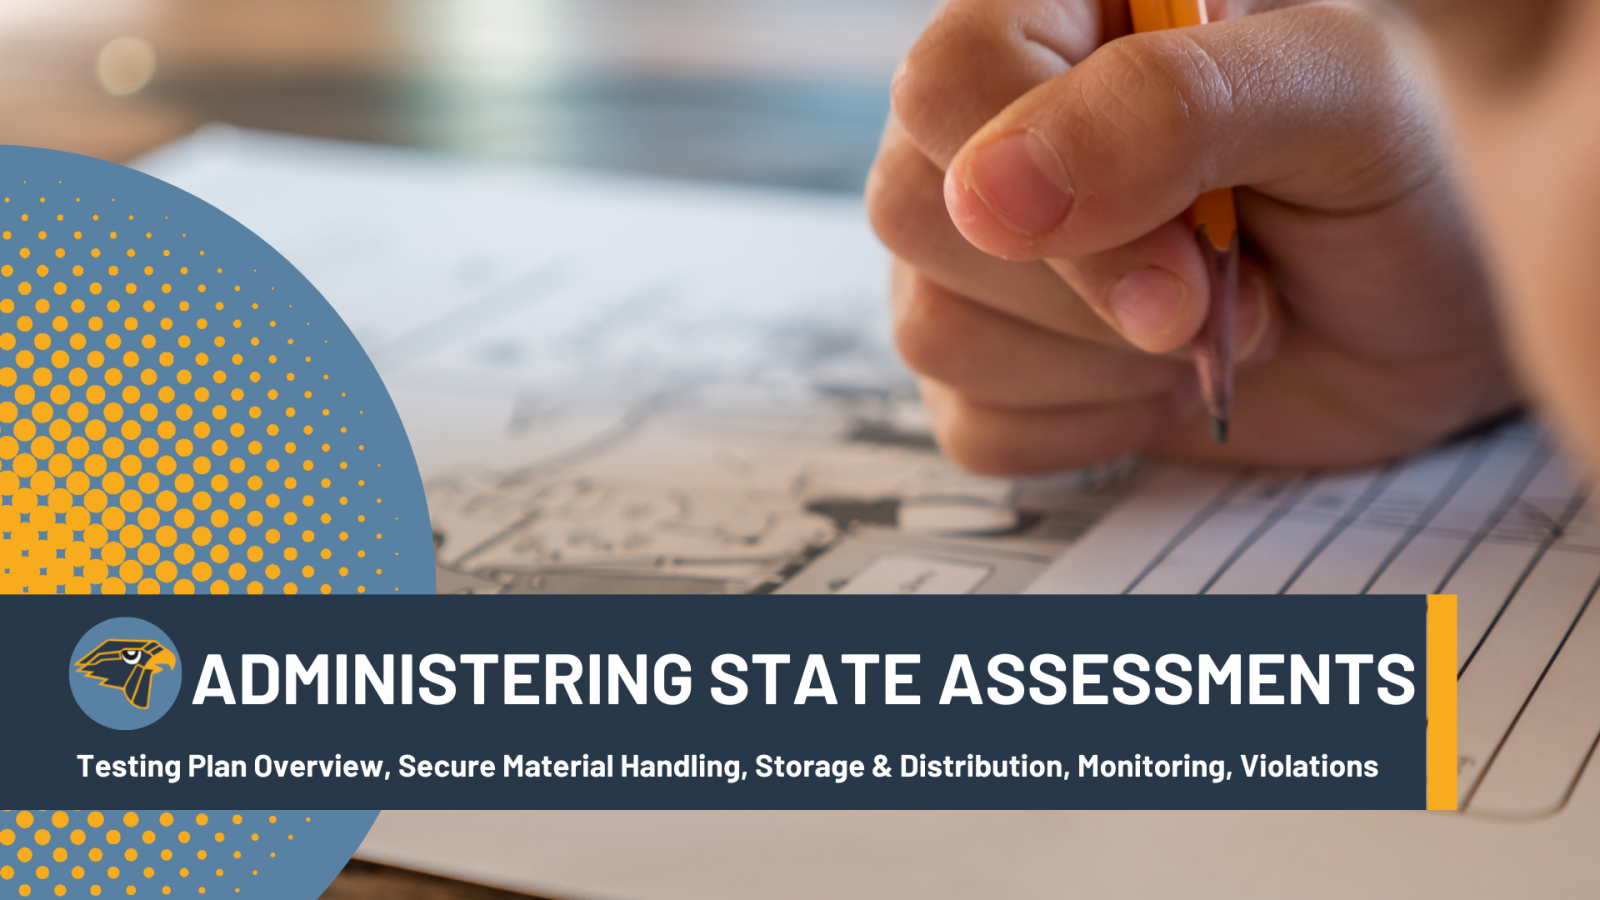 Administering State Assessments